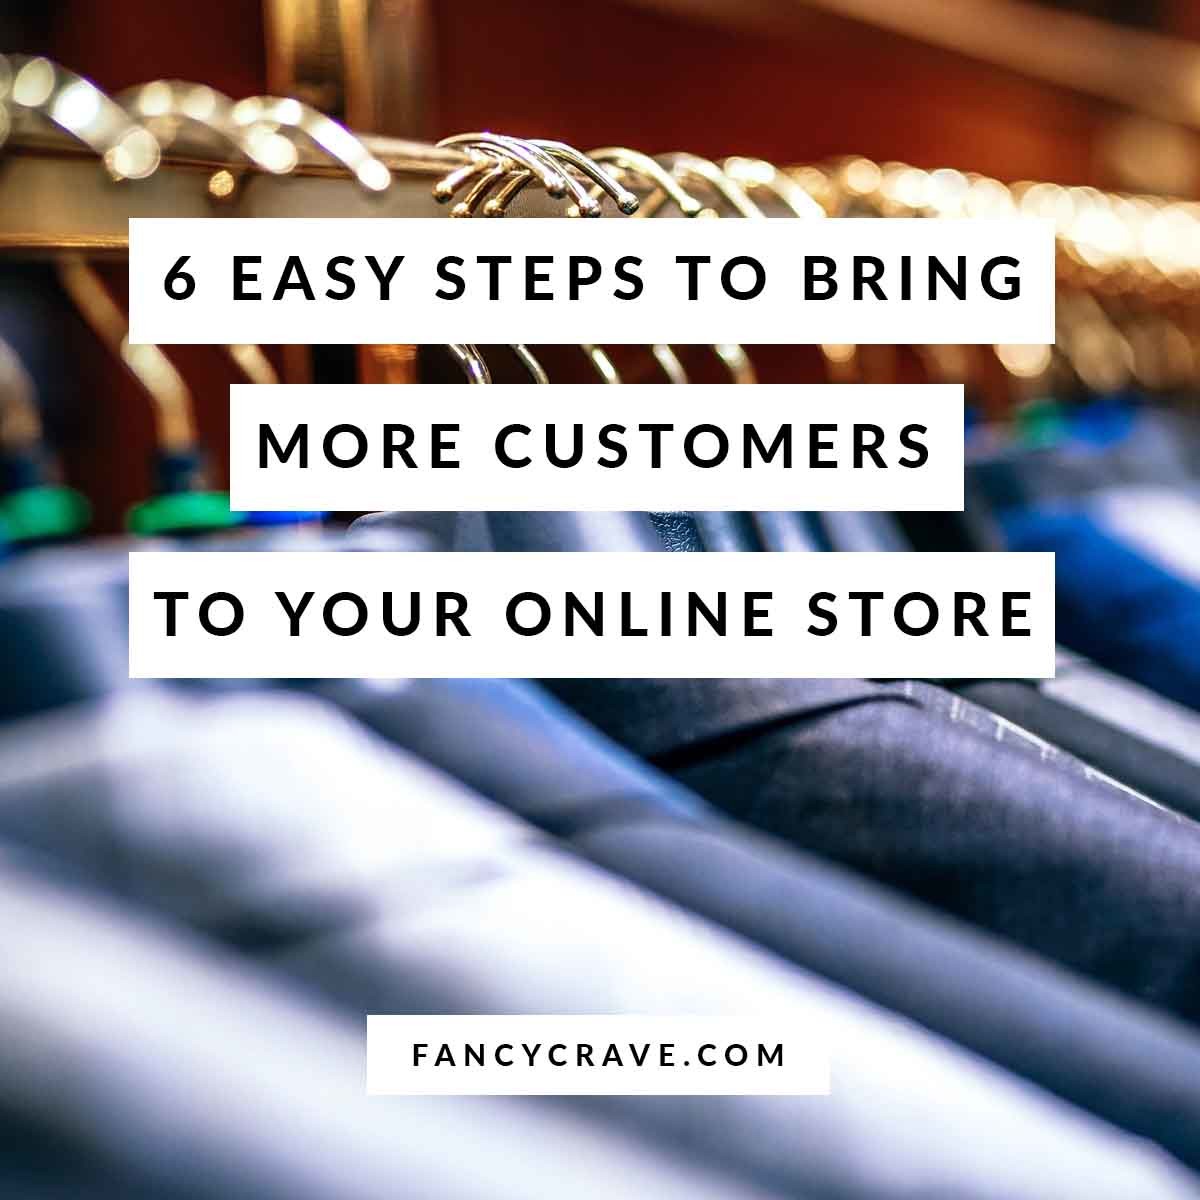 EASY STEPS TO BRING MORE CUSTOMERS TO YOUR ONLINE STORE